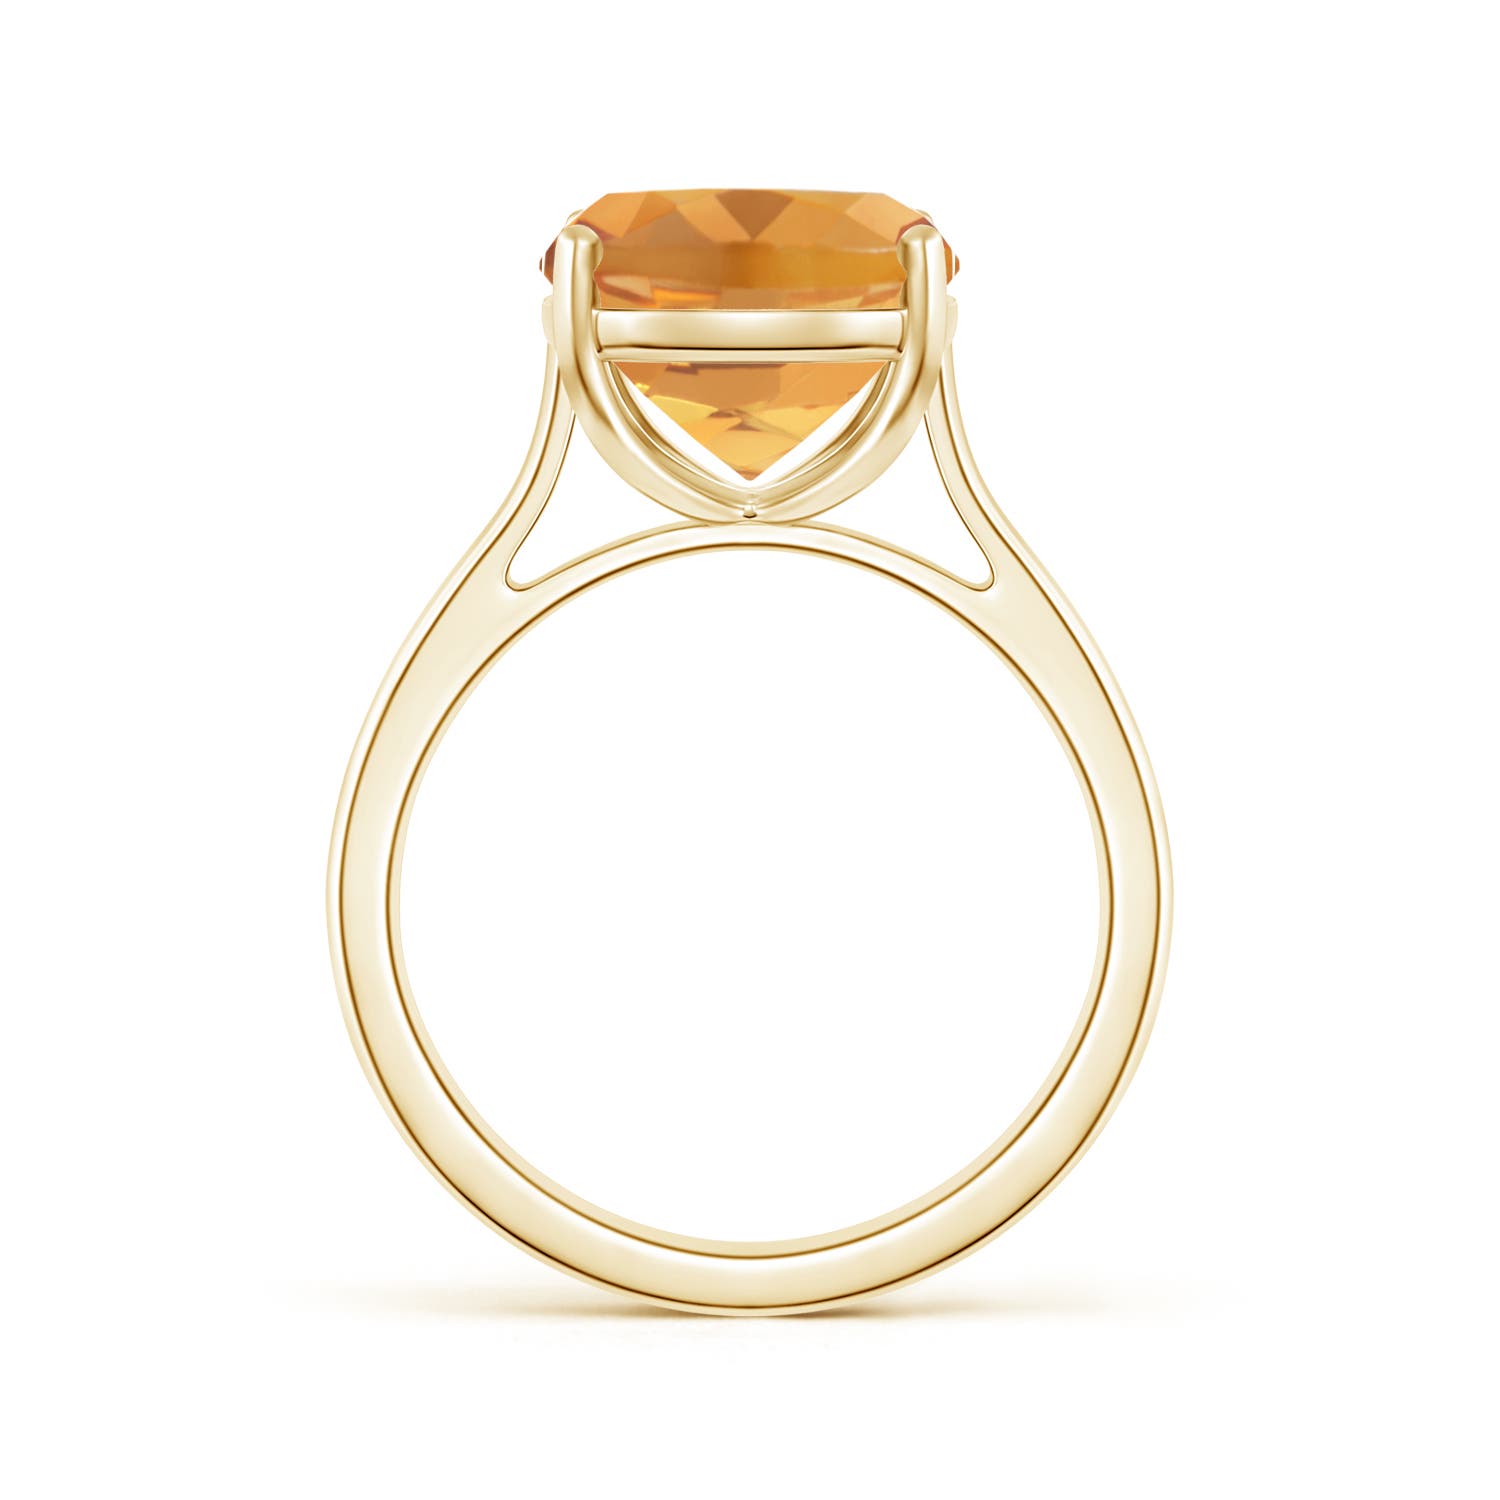 A - Citrine / 4.74 CT / 14 KT Yellow Gold